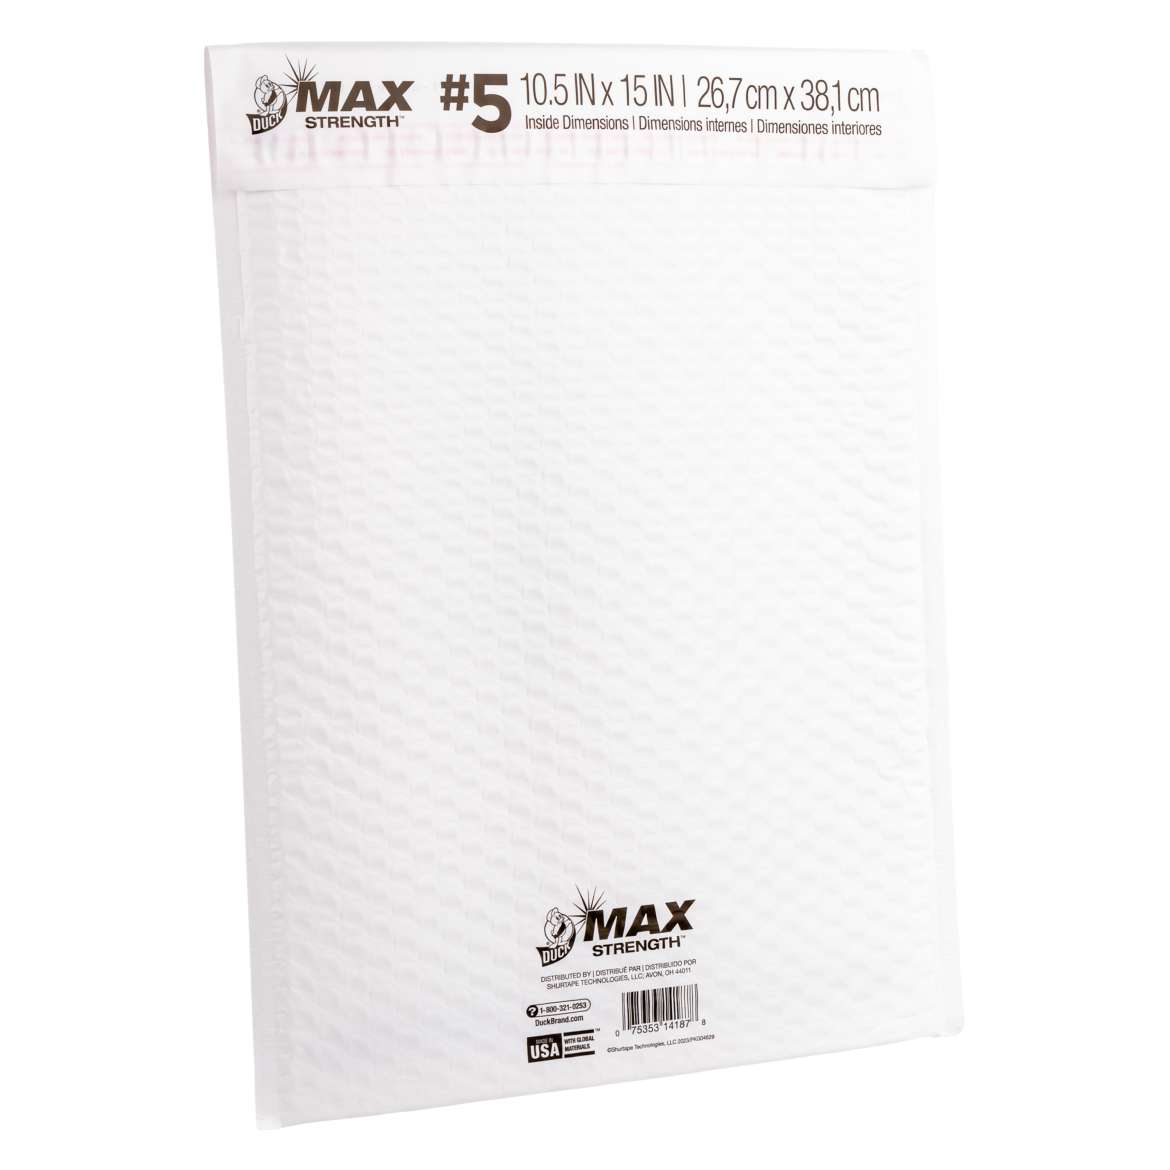 Duck® Brand Poly Bubble Mailers Image